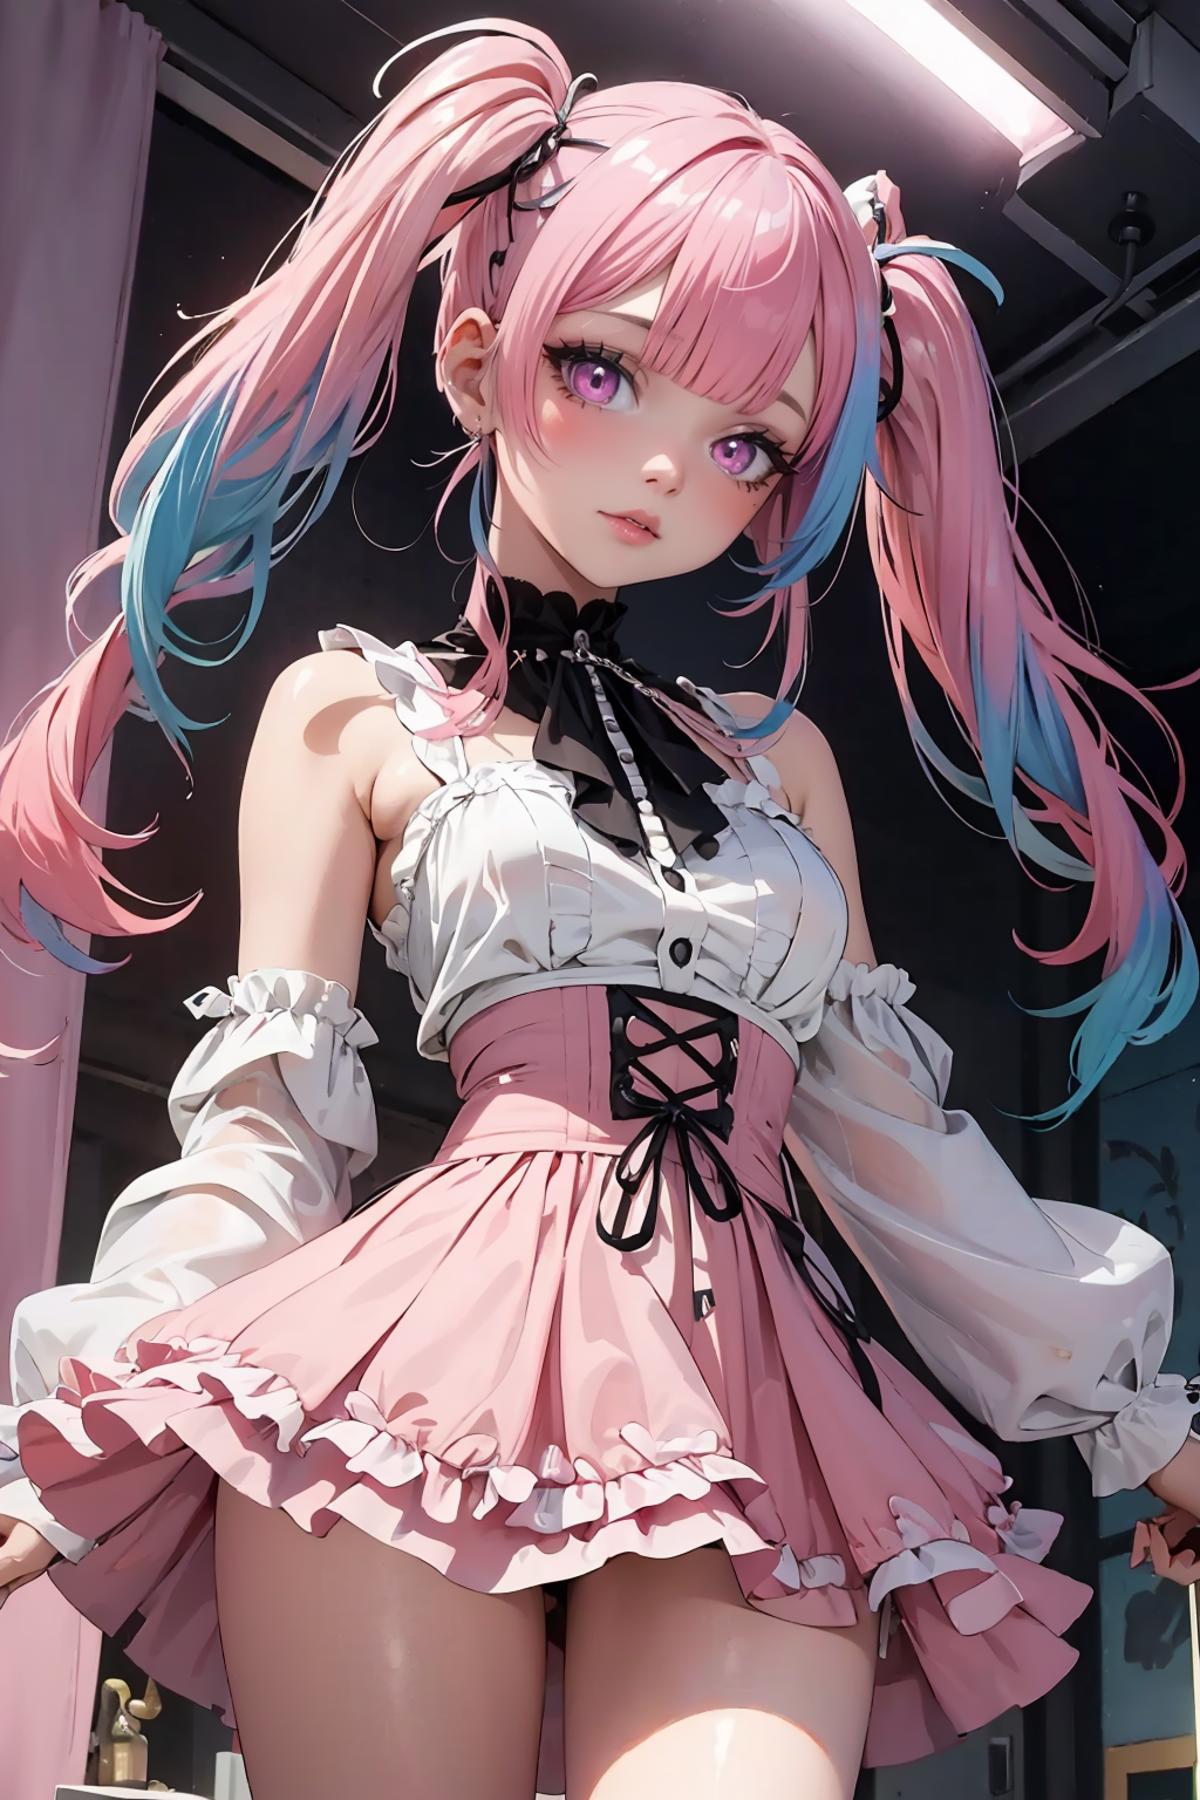 Pastel Goth - by EDG image by ClamJam